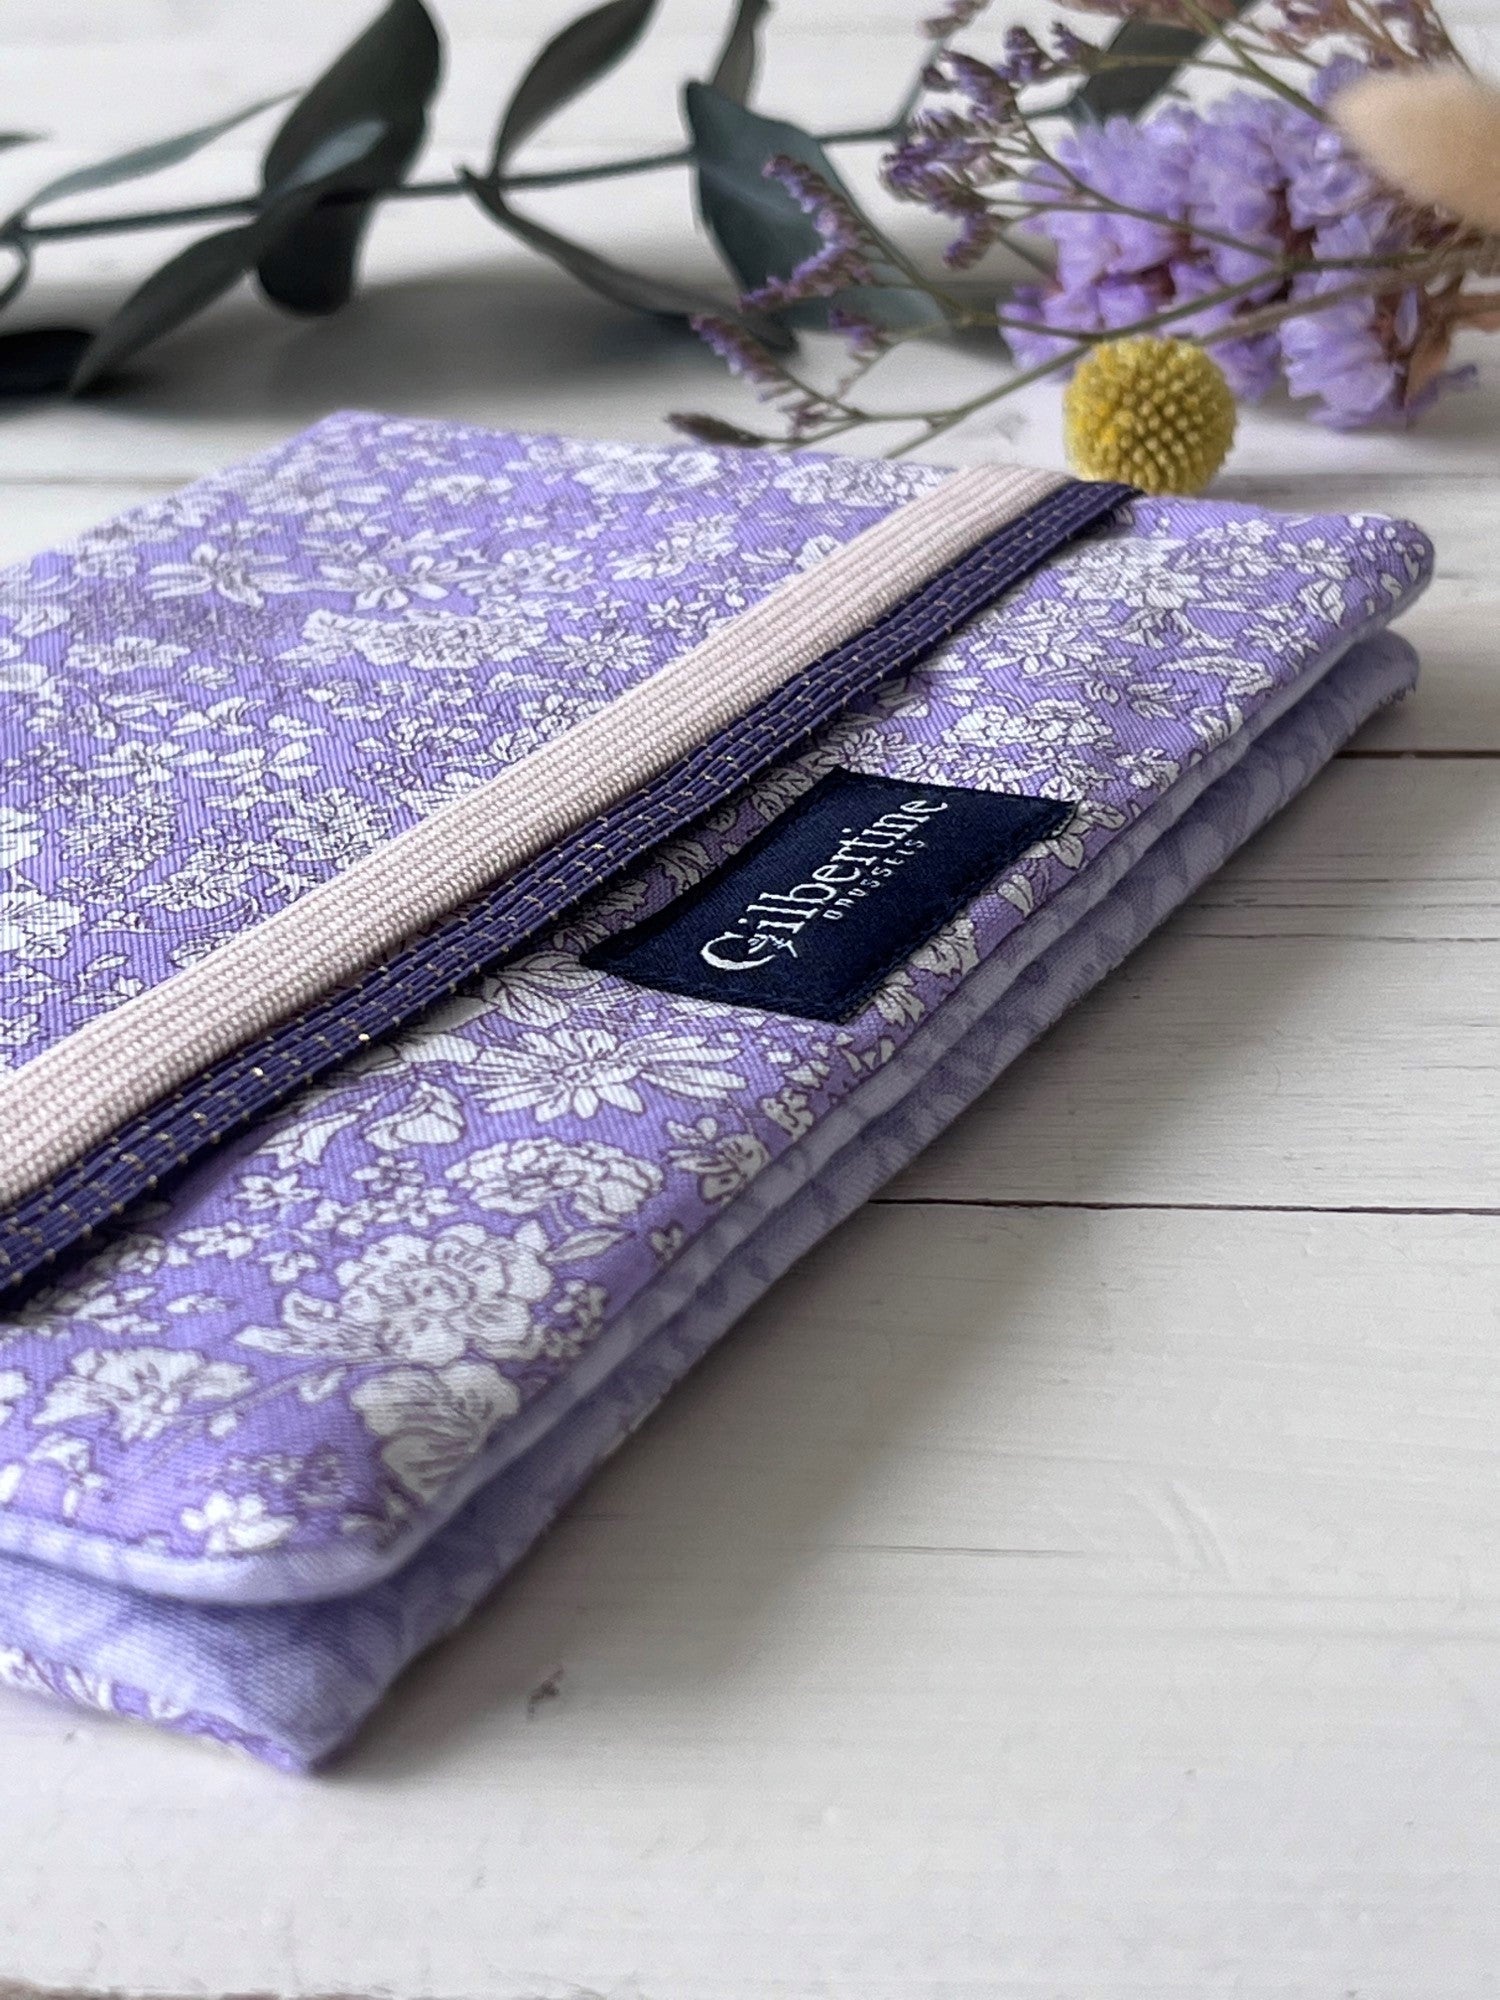 Couvre-livre tissu Liberty Awesome Lilac - protection livre poche - protege roman - Gilbertine Brussels